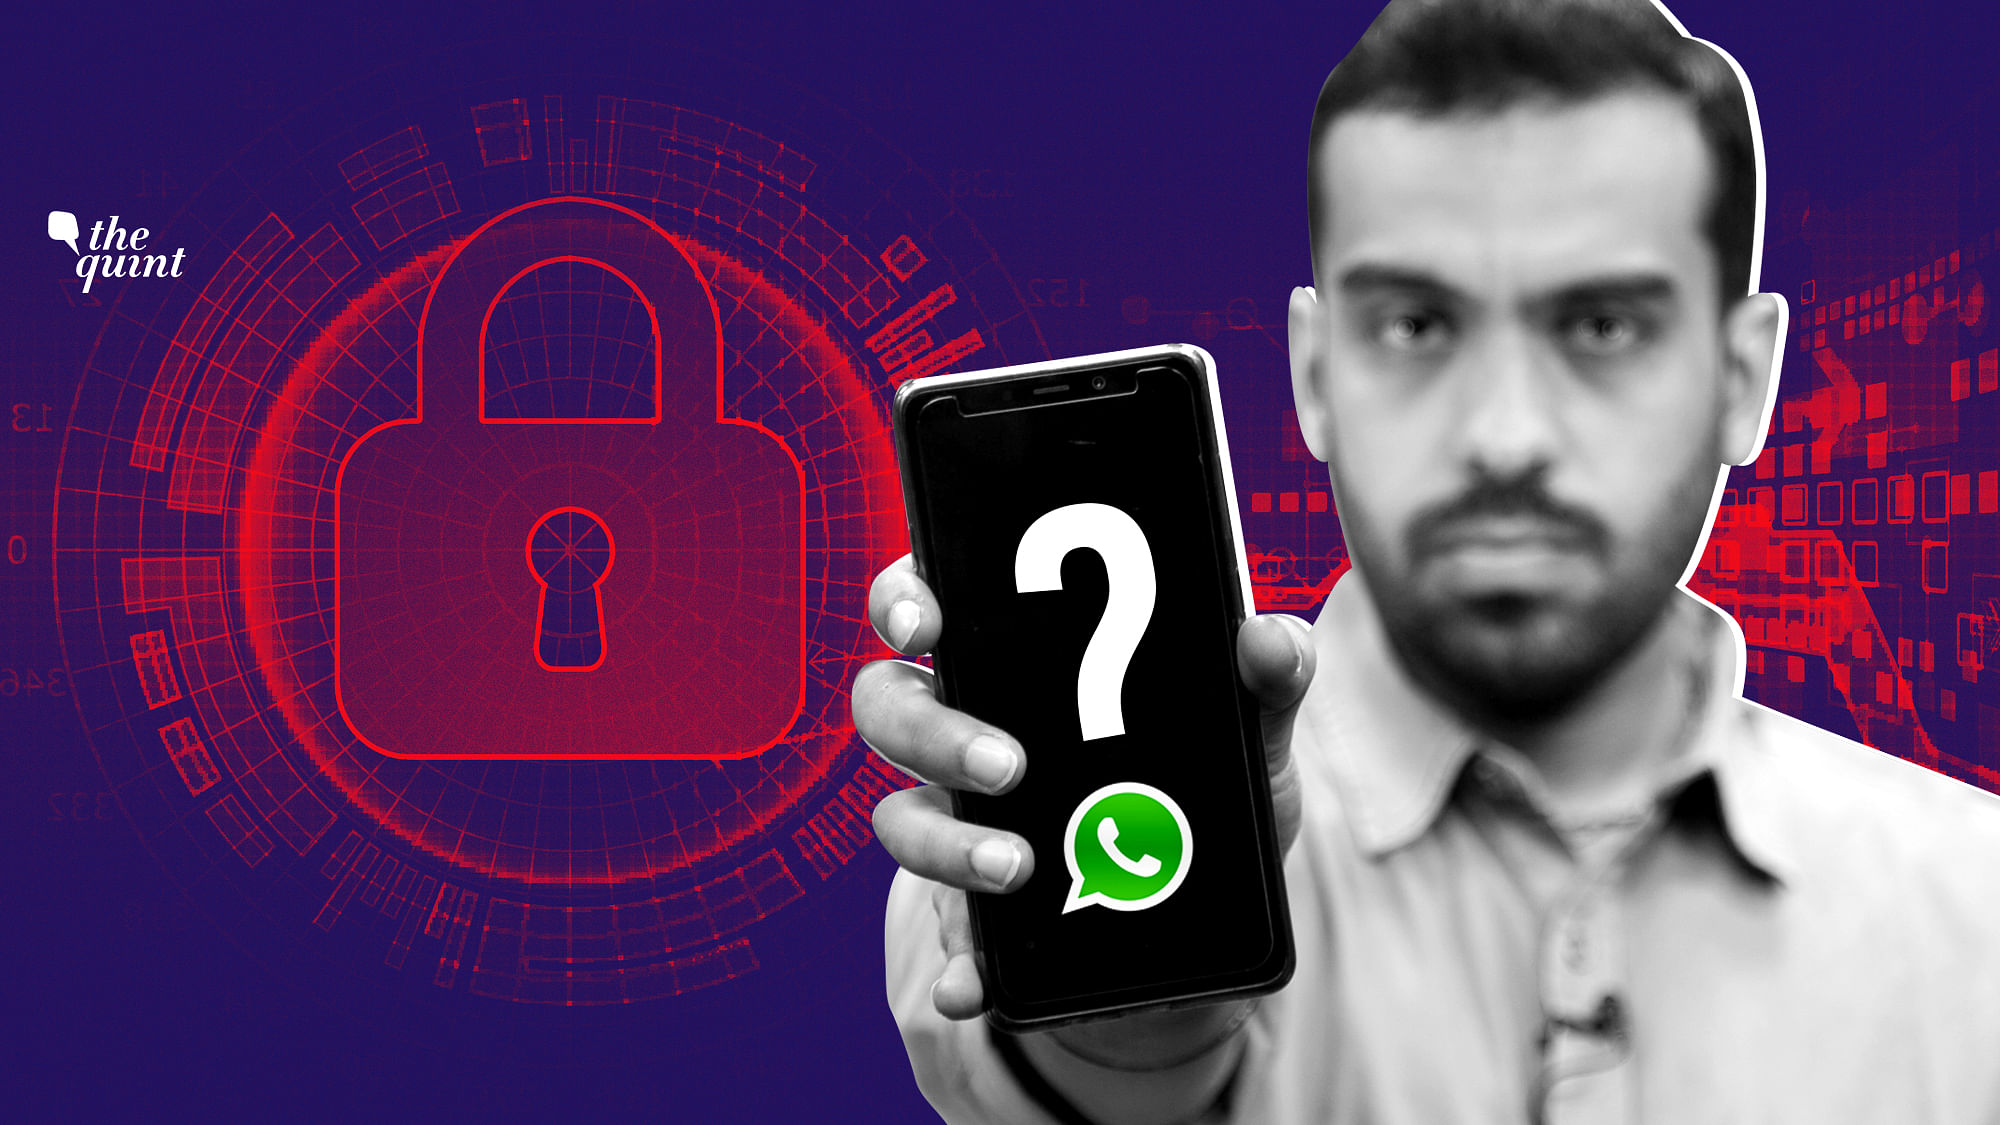 WhatsApp’s parent company, Facebook, has issued a transfer petition from Madras High Court to Supreme Court in the encryption and traceability case&nbsp;